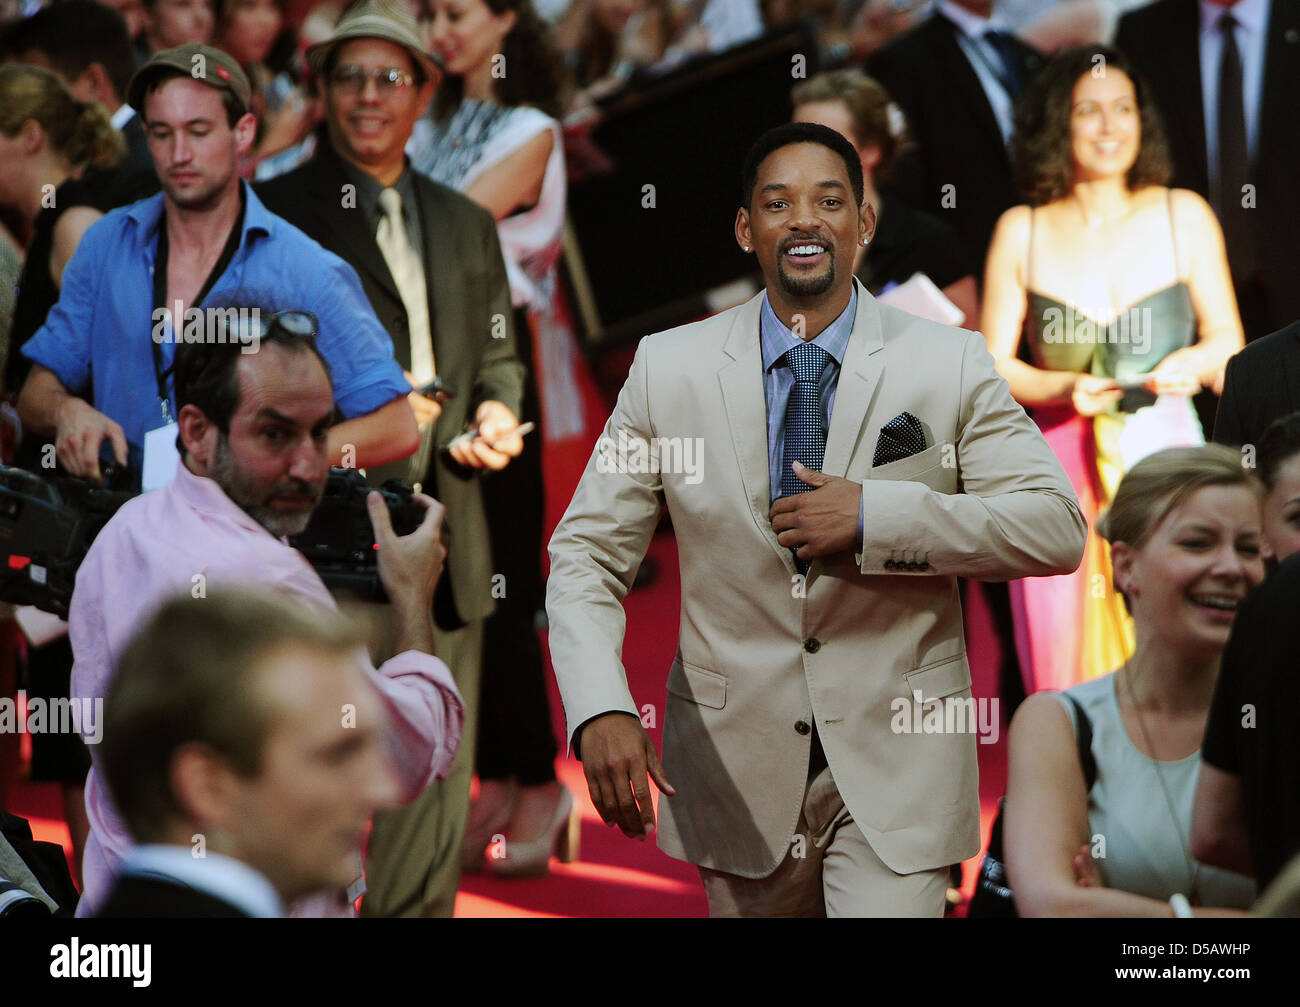 American actor Will Smith walks across the red carpet at the premier of 'Karate Kid' in Berlin, Germany, 19 July 2010. The film will be shown in German cinemas starting 22 July 2010. Photo: Hannibal Hanschke Stock Photo